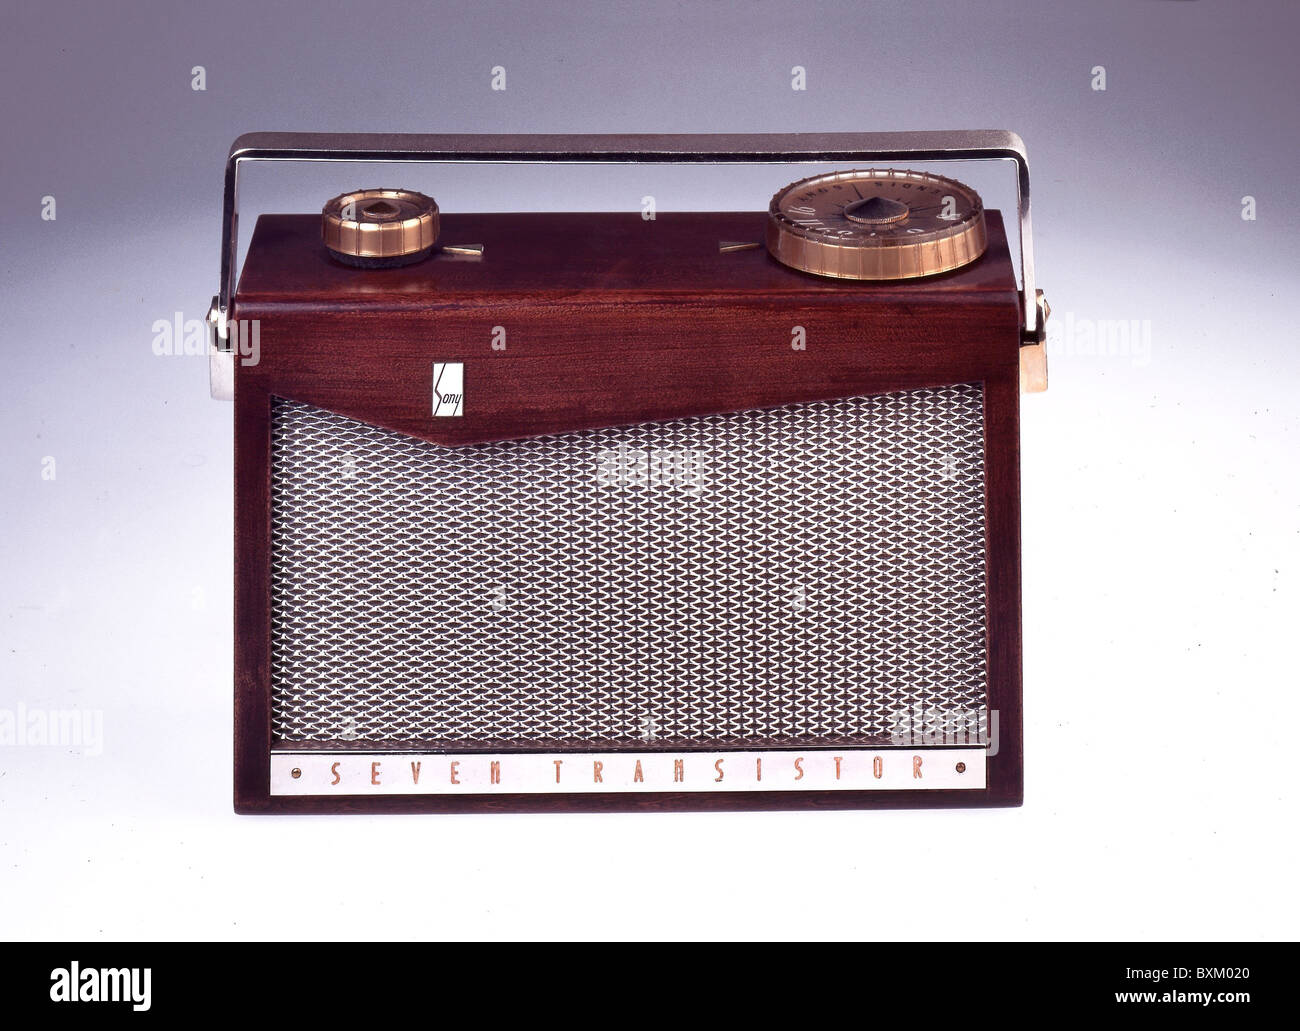 broadcast, radio sets, Sony TR-72, Japan, circa 1956, communications, technic, technics, historic, historical, 1950s, 50s, 20th century, wooden case, loudspeaker, loud speaker, old company sign, logo, portable, transistor, Made in Japan, Japanese, audio, radio set, Los collection, studio shot, Additional-Rights-Clearences-Not Available Stock Photo